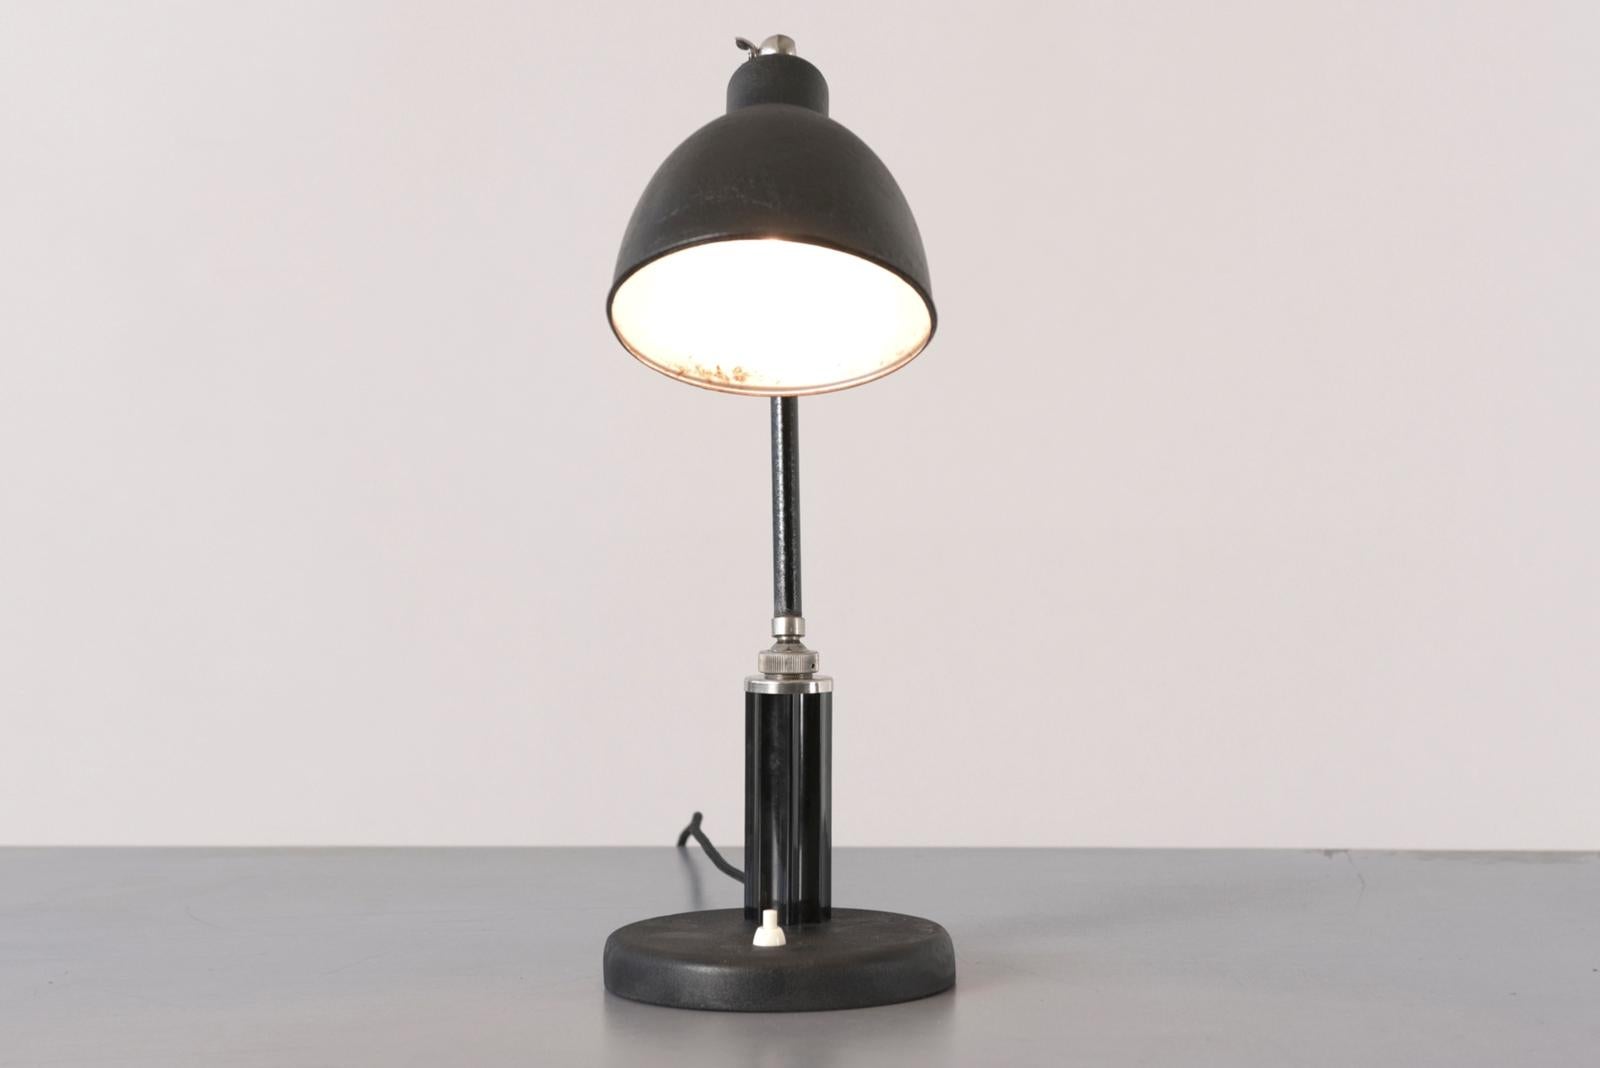 Metal Table Lamp Grapholux by Christian Dell for Molitor, Germany - 1935 For Sale